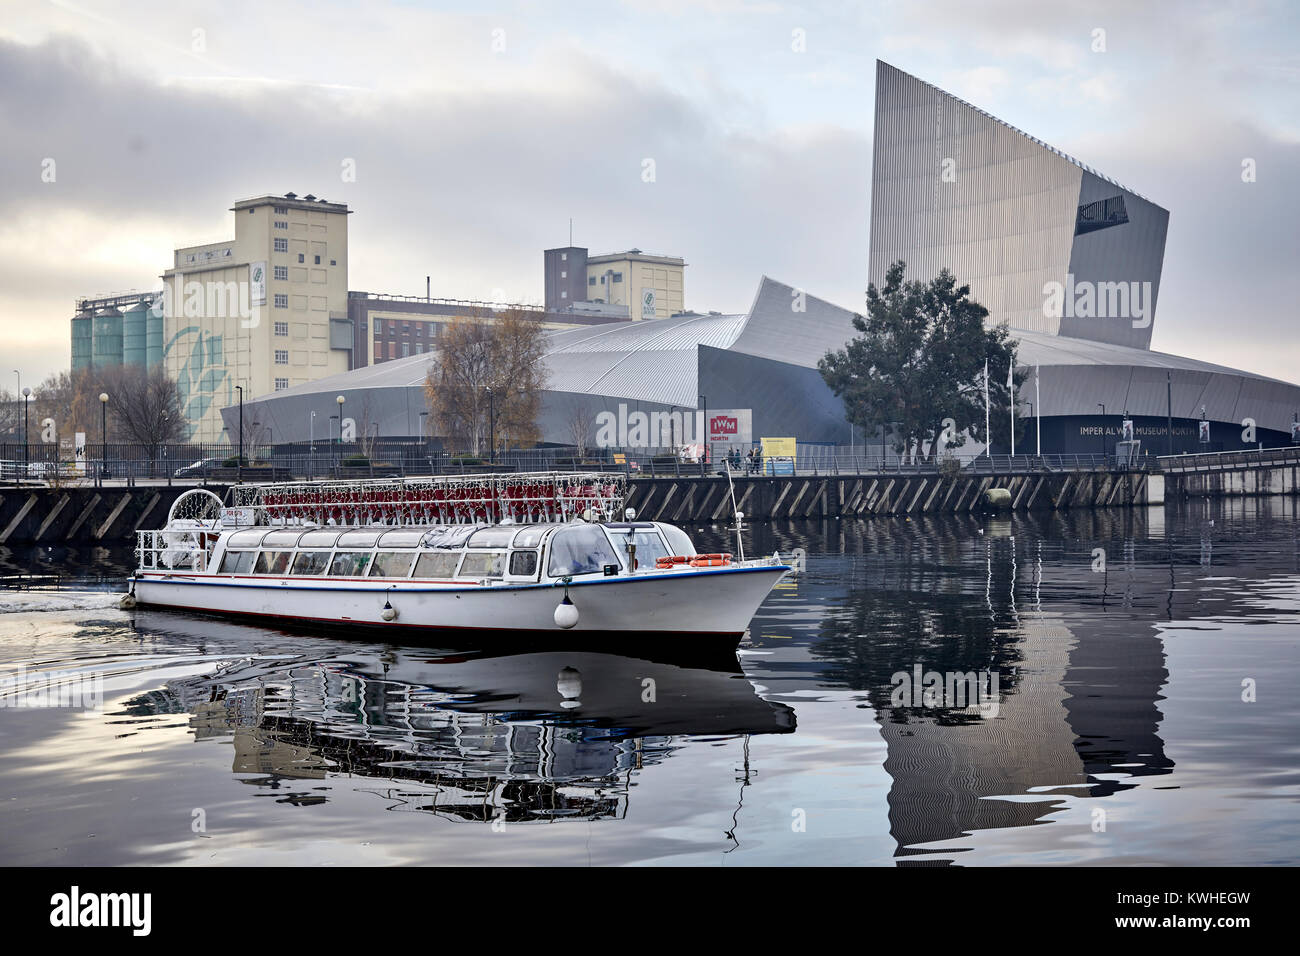 Modern Imperial War Museum North ( IWM North) Trafford Park, Greater Manchester, England. Bridgewater Cruise leaving on Ship Canal Salford Quays Stock Photo